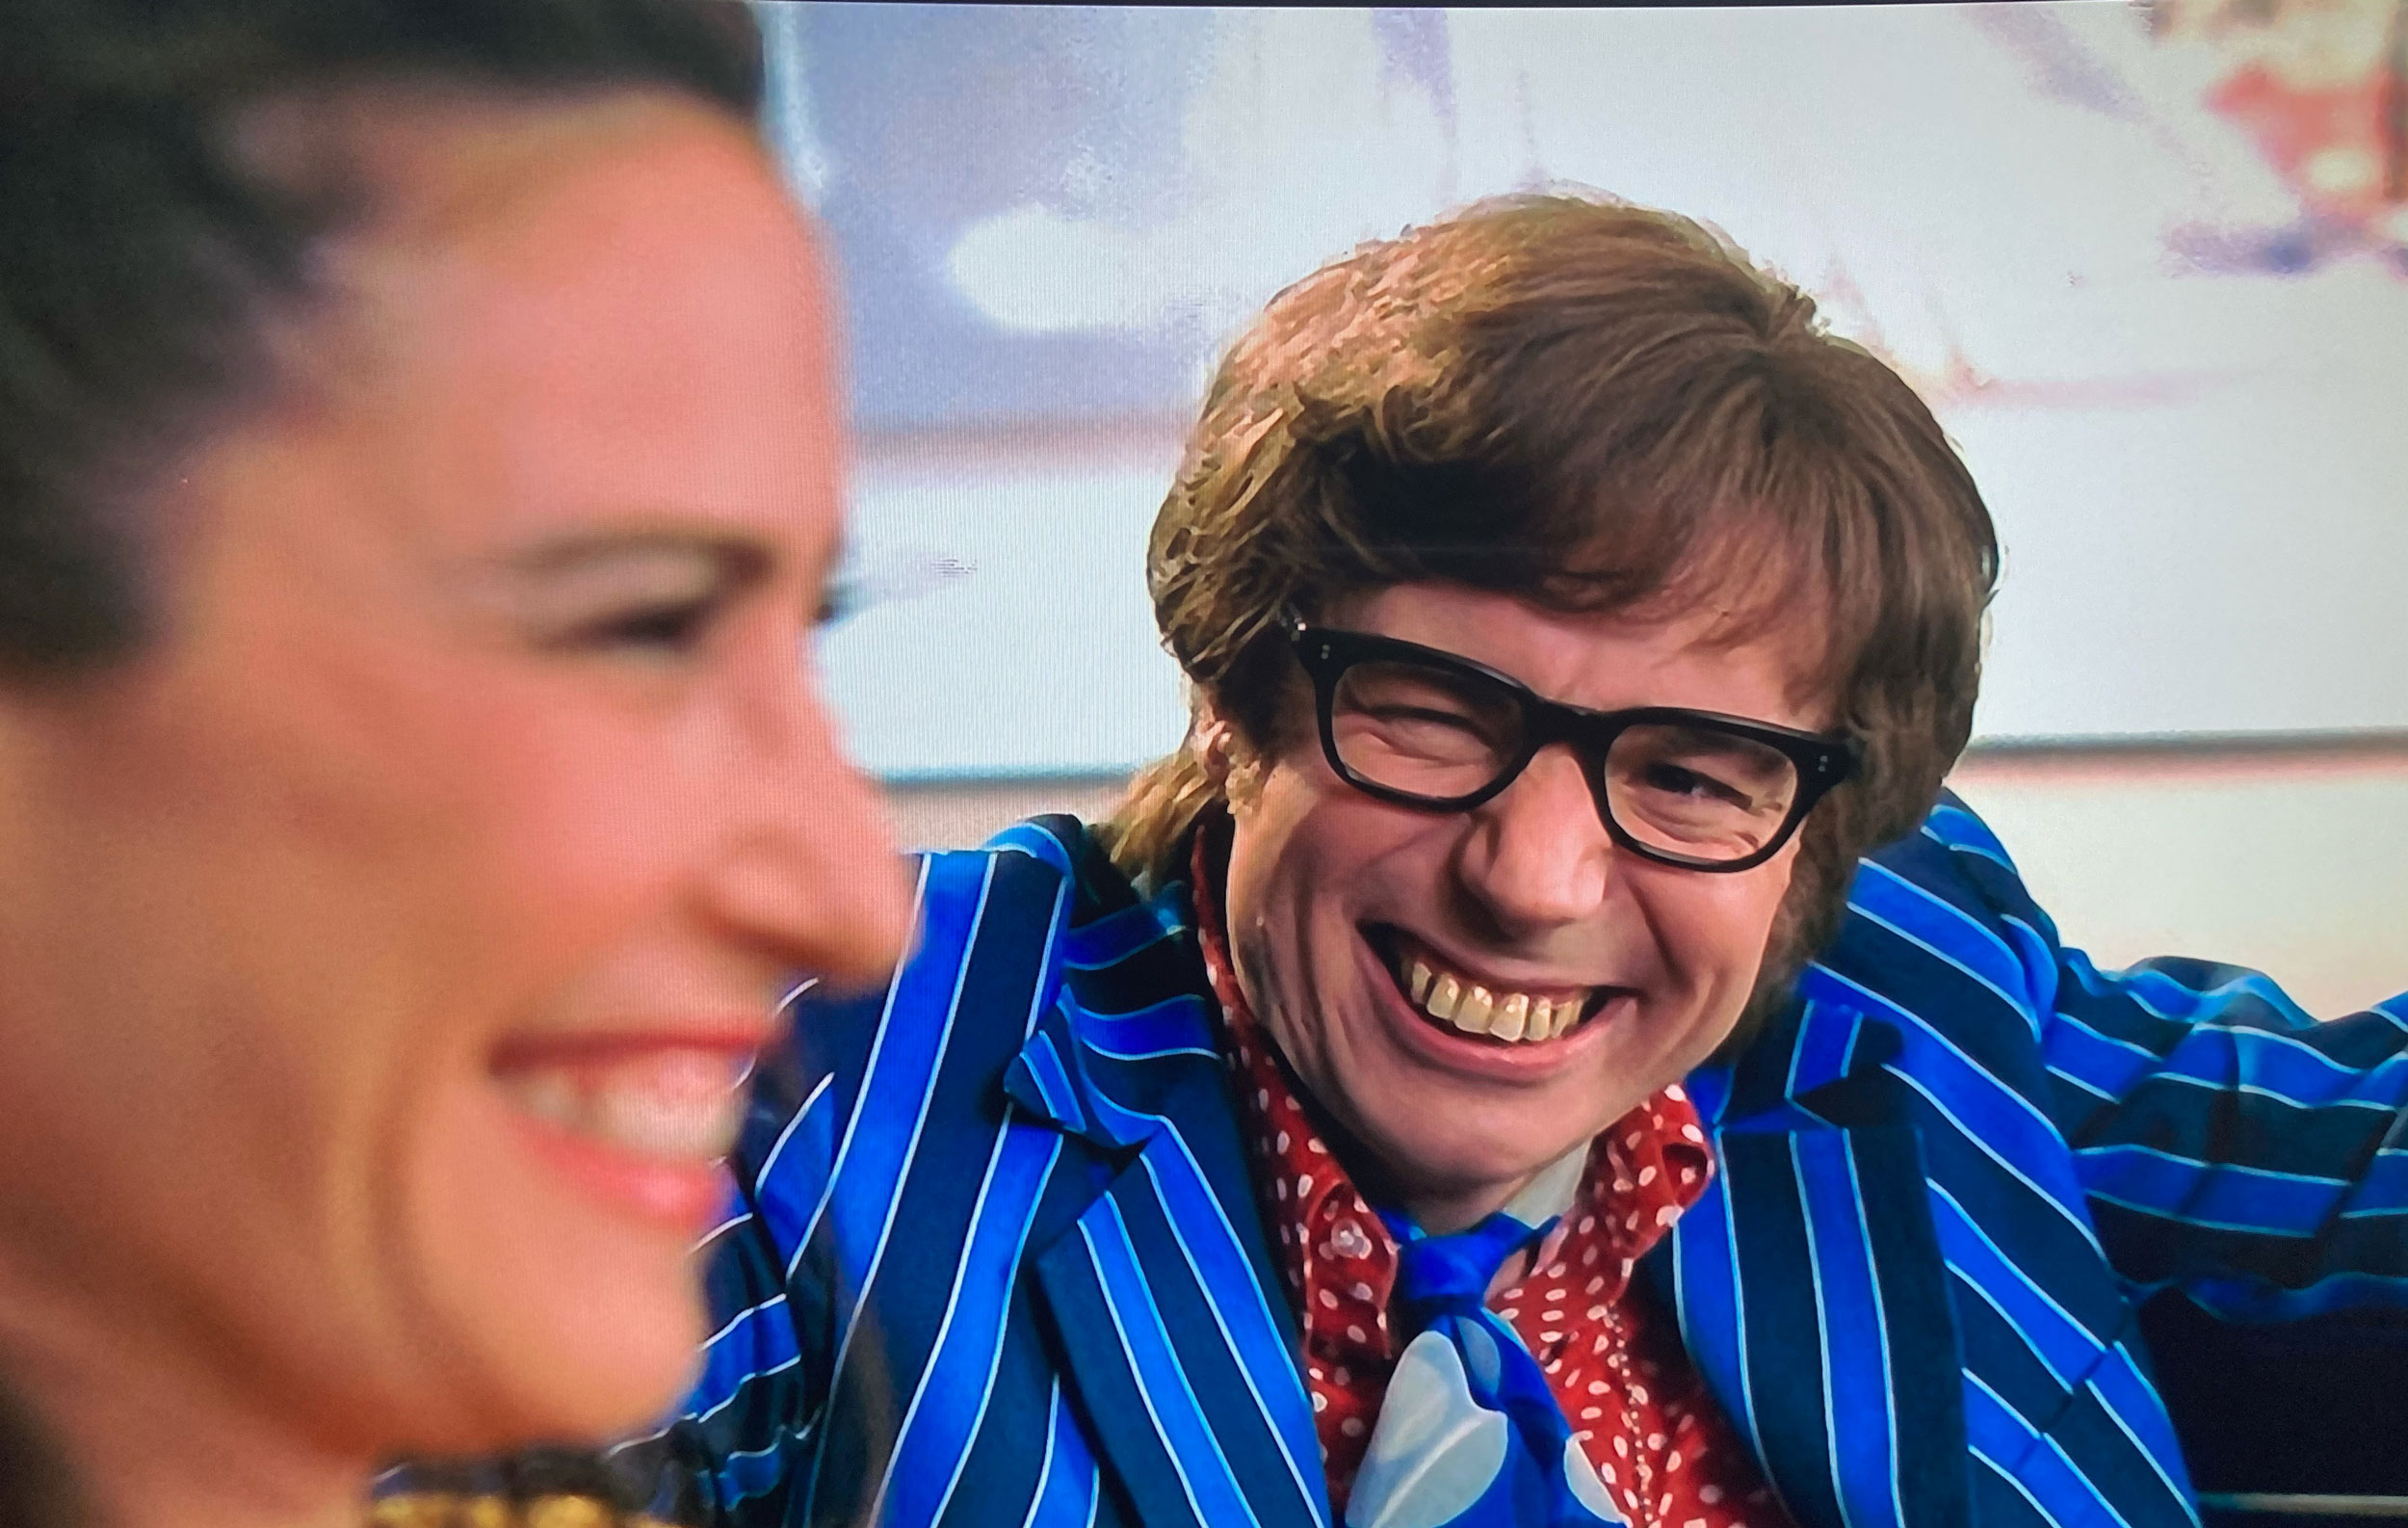 https://fromtailorswithlove.co.uk/wp-content/uploads/austin-powers-teeth.jpg